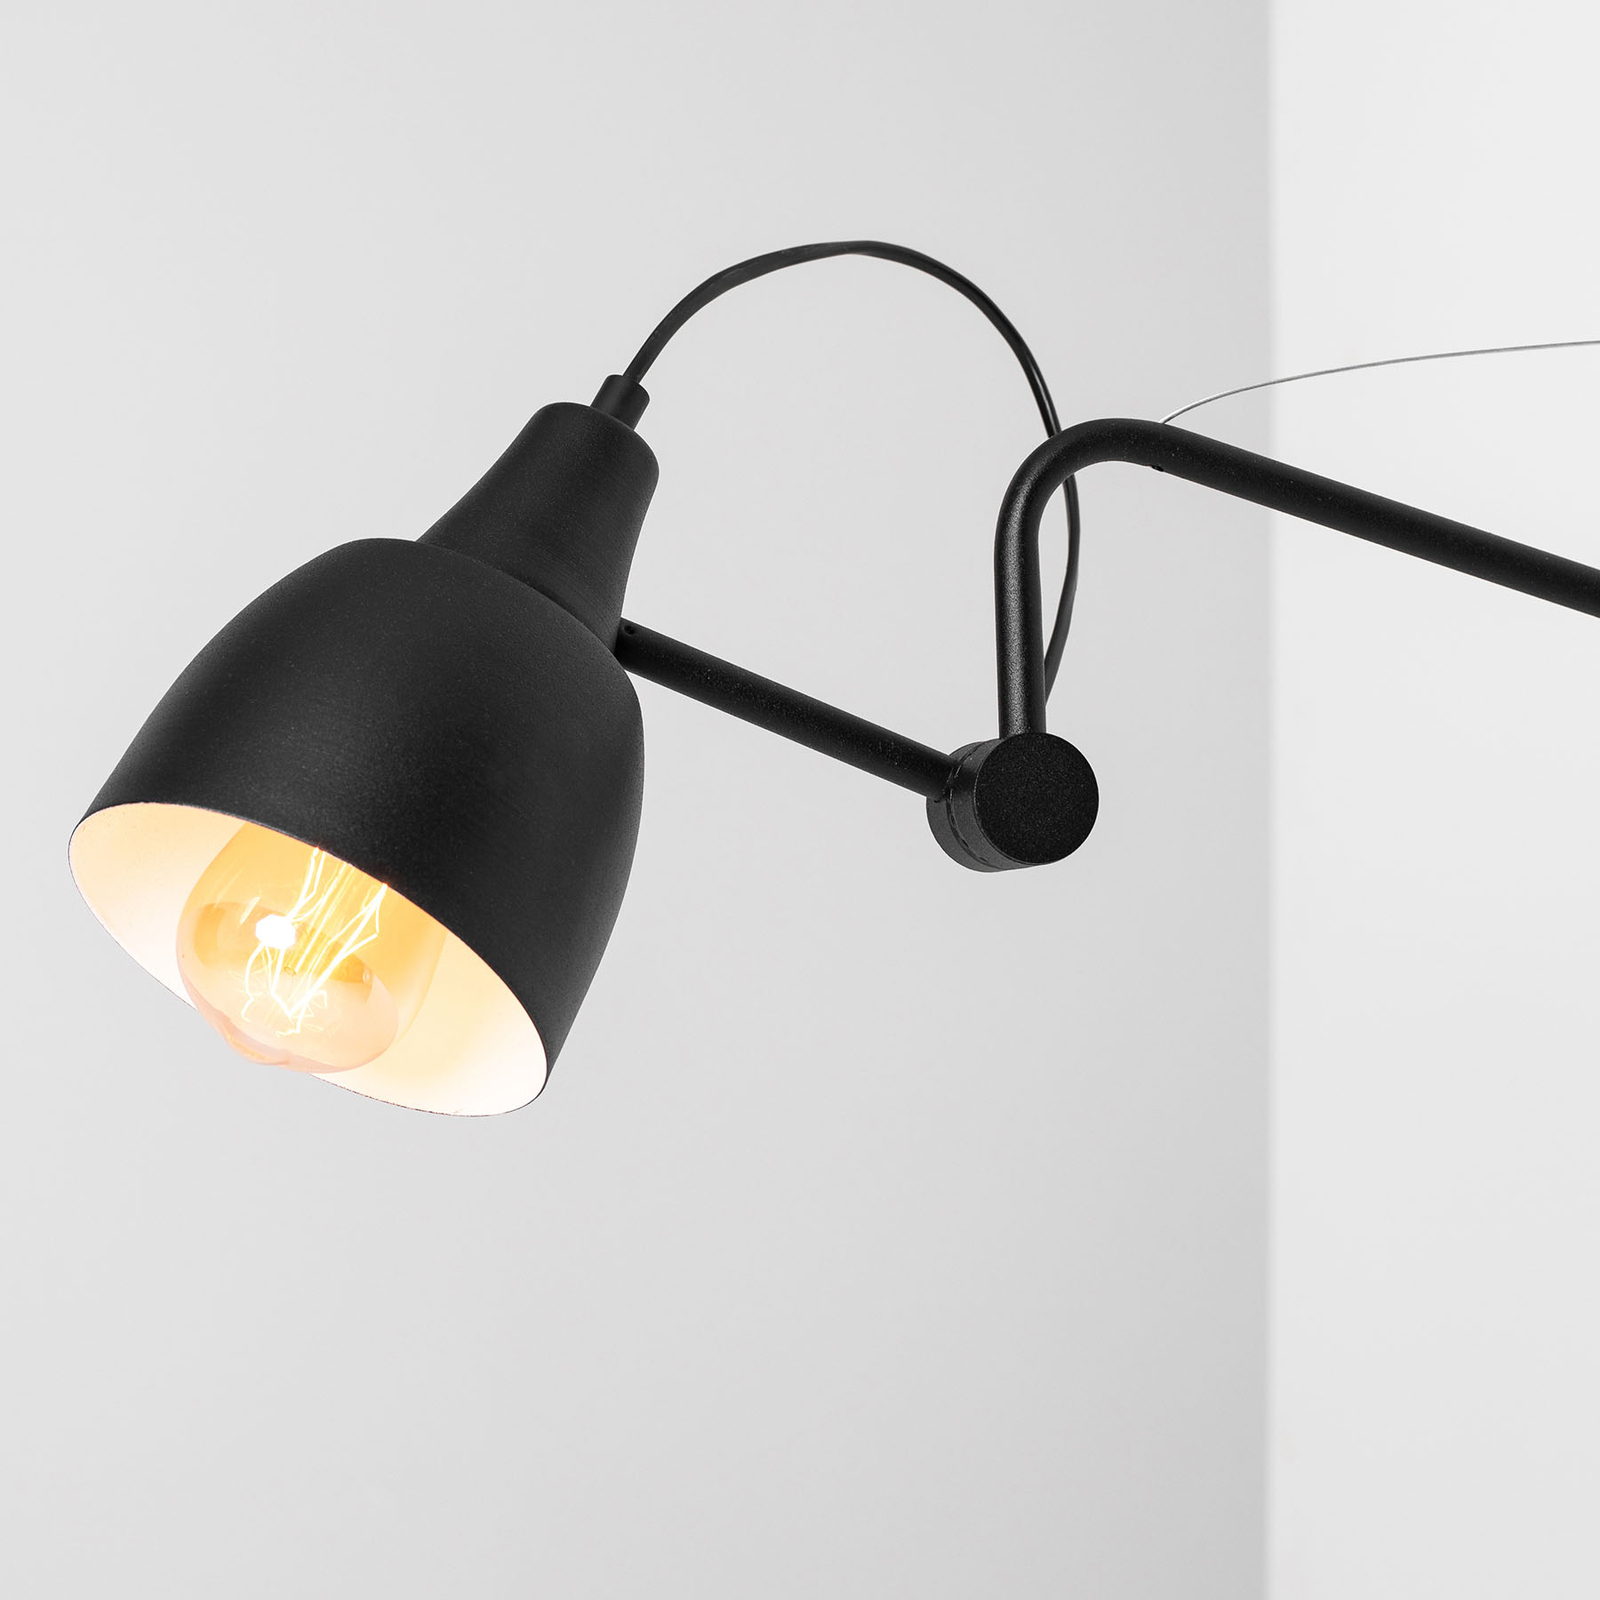 1031 wall light with cantilever arm, black